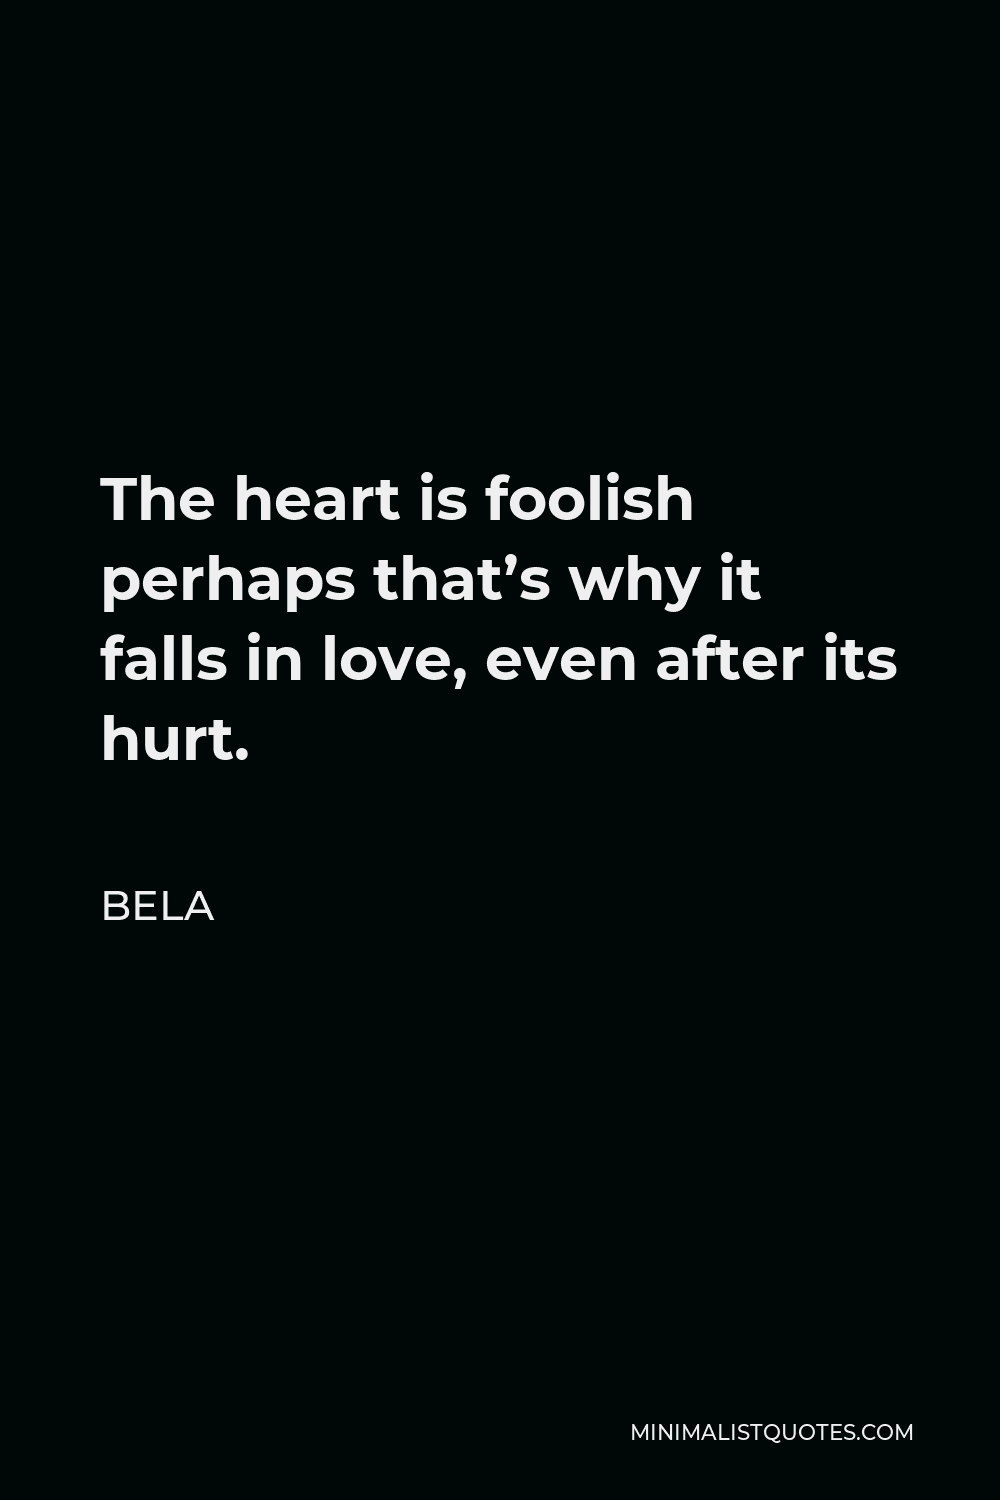 Bela Quote - The heart is foolish perhaps that’s why it falls in love, even after its hurt.